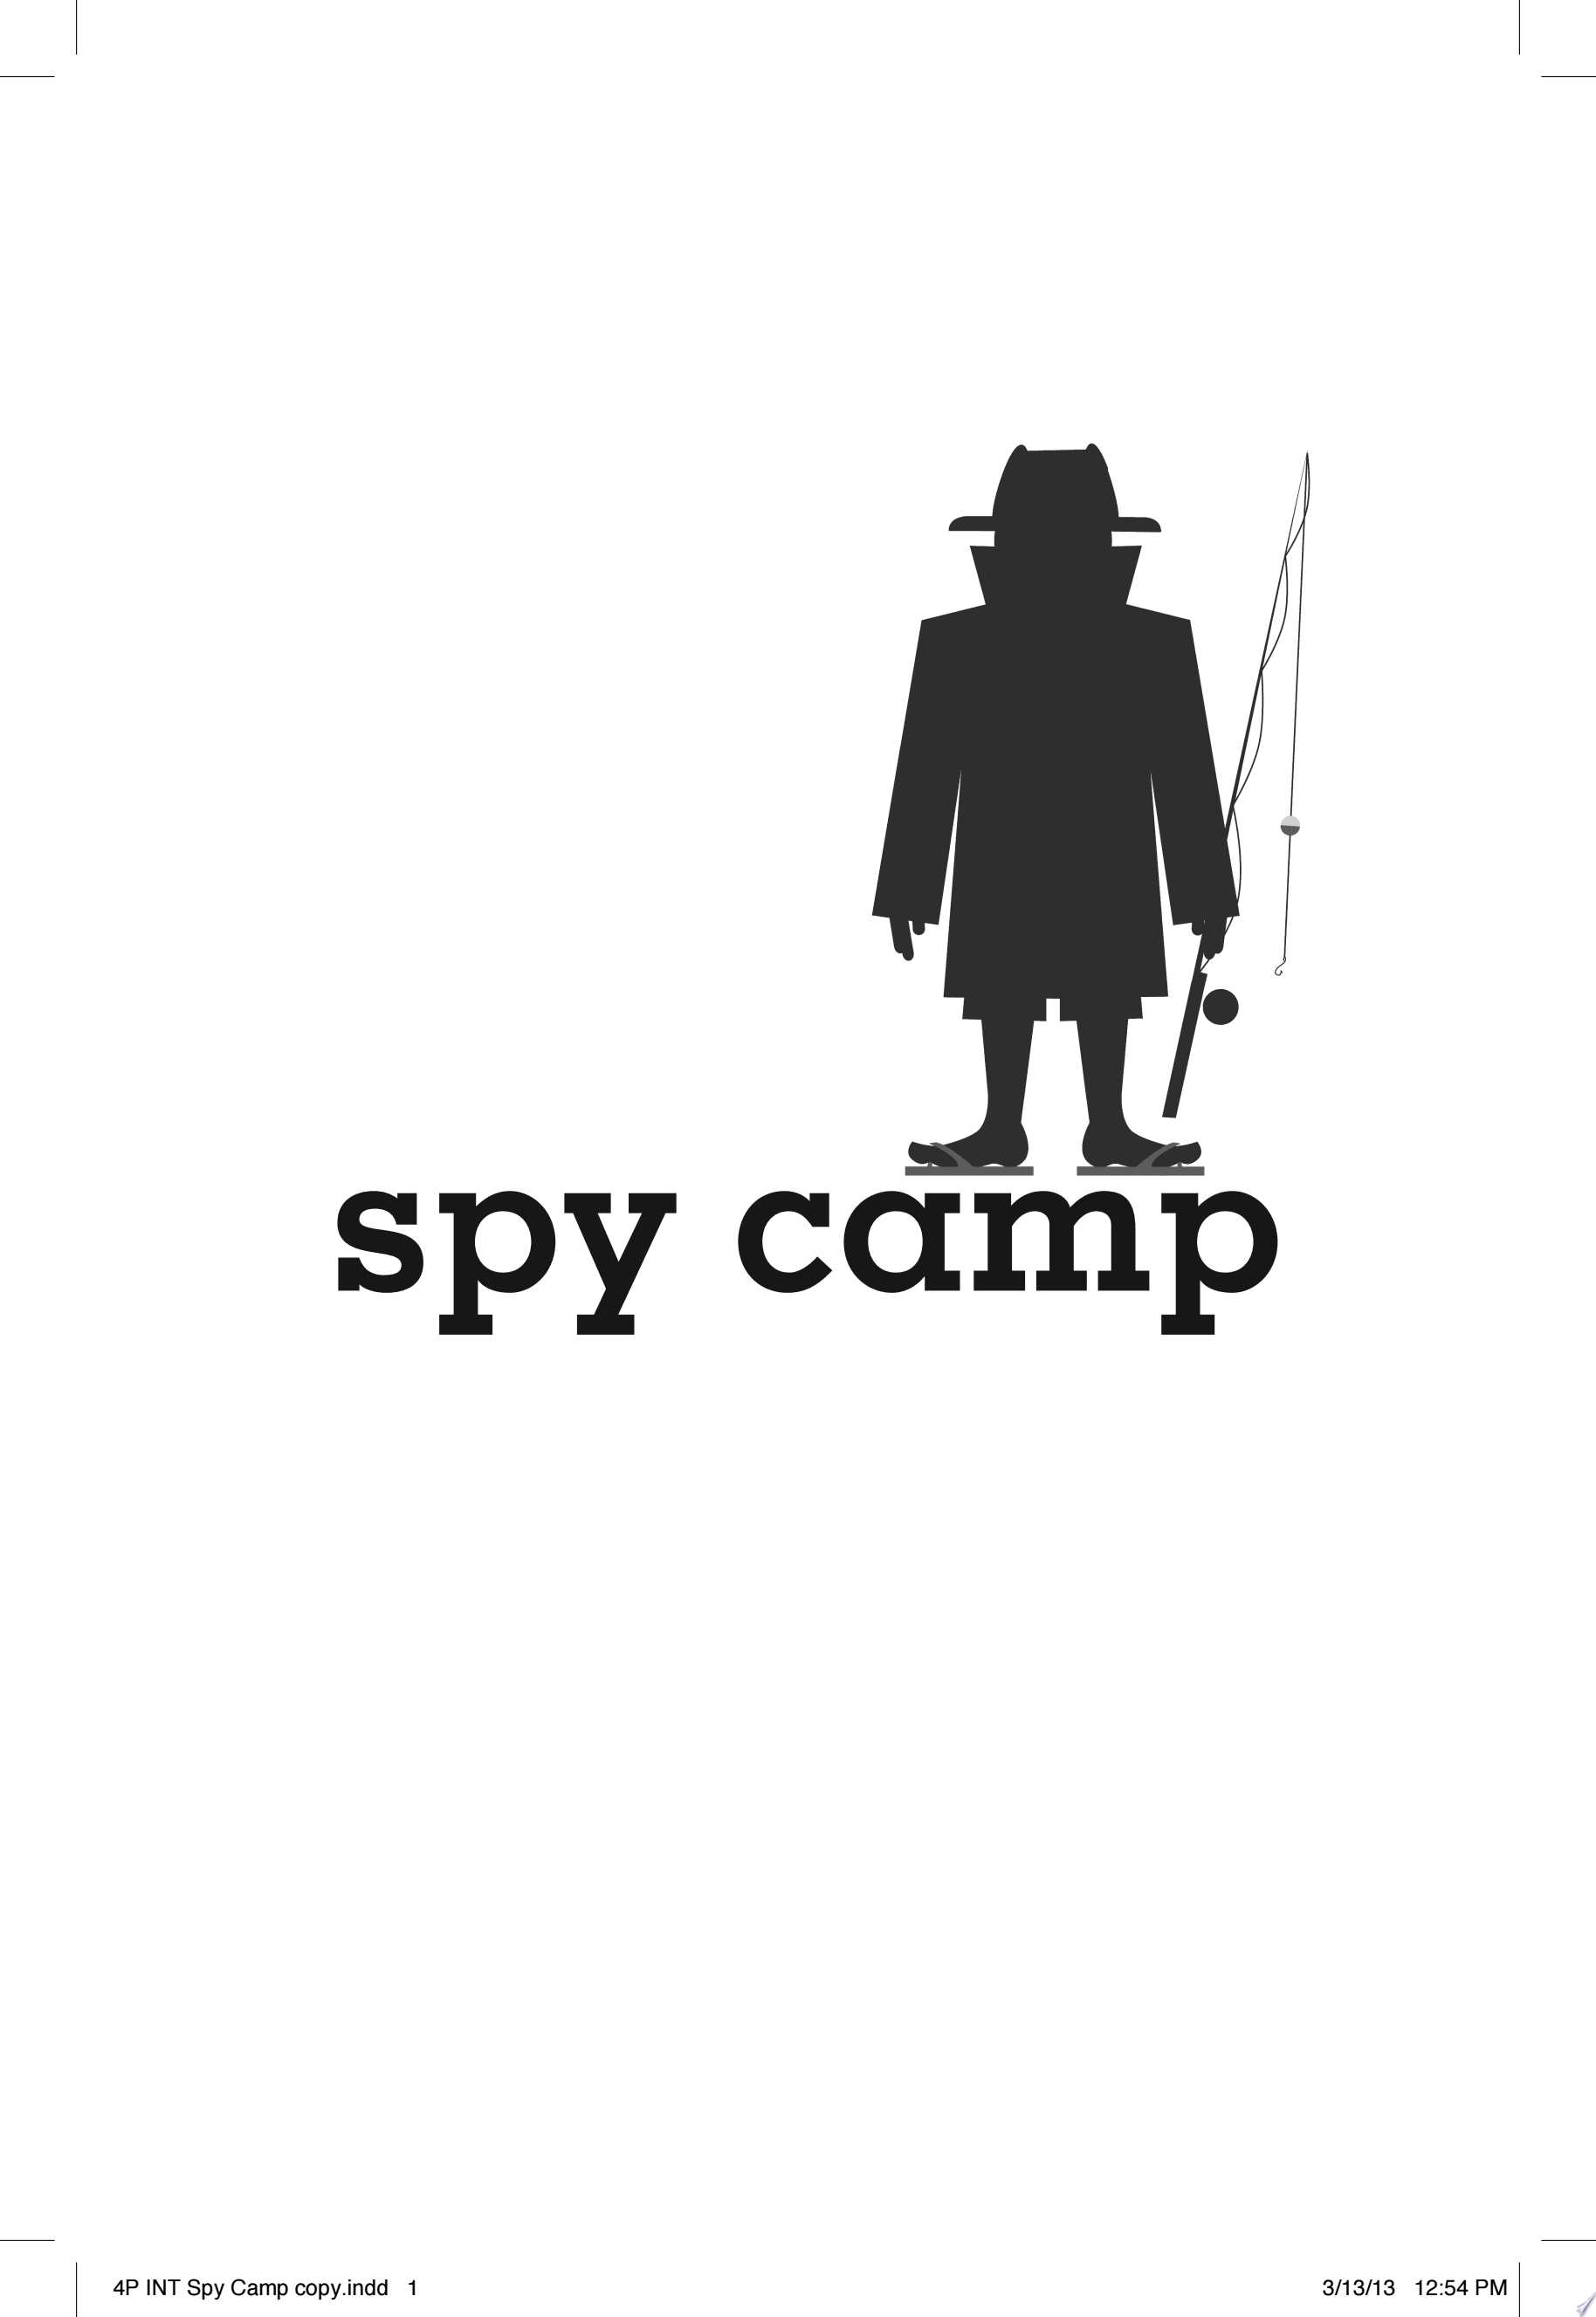 Image for "Spy Camp"